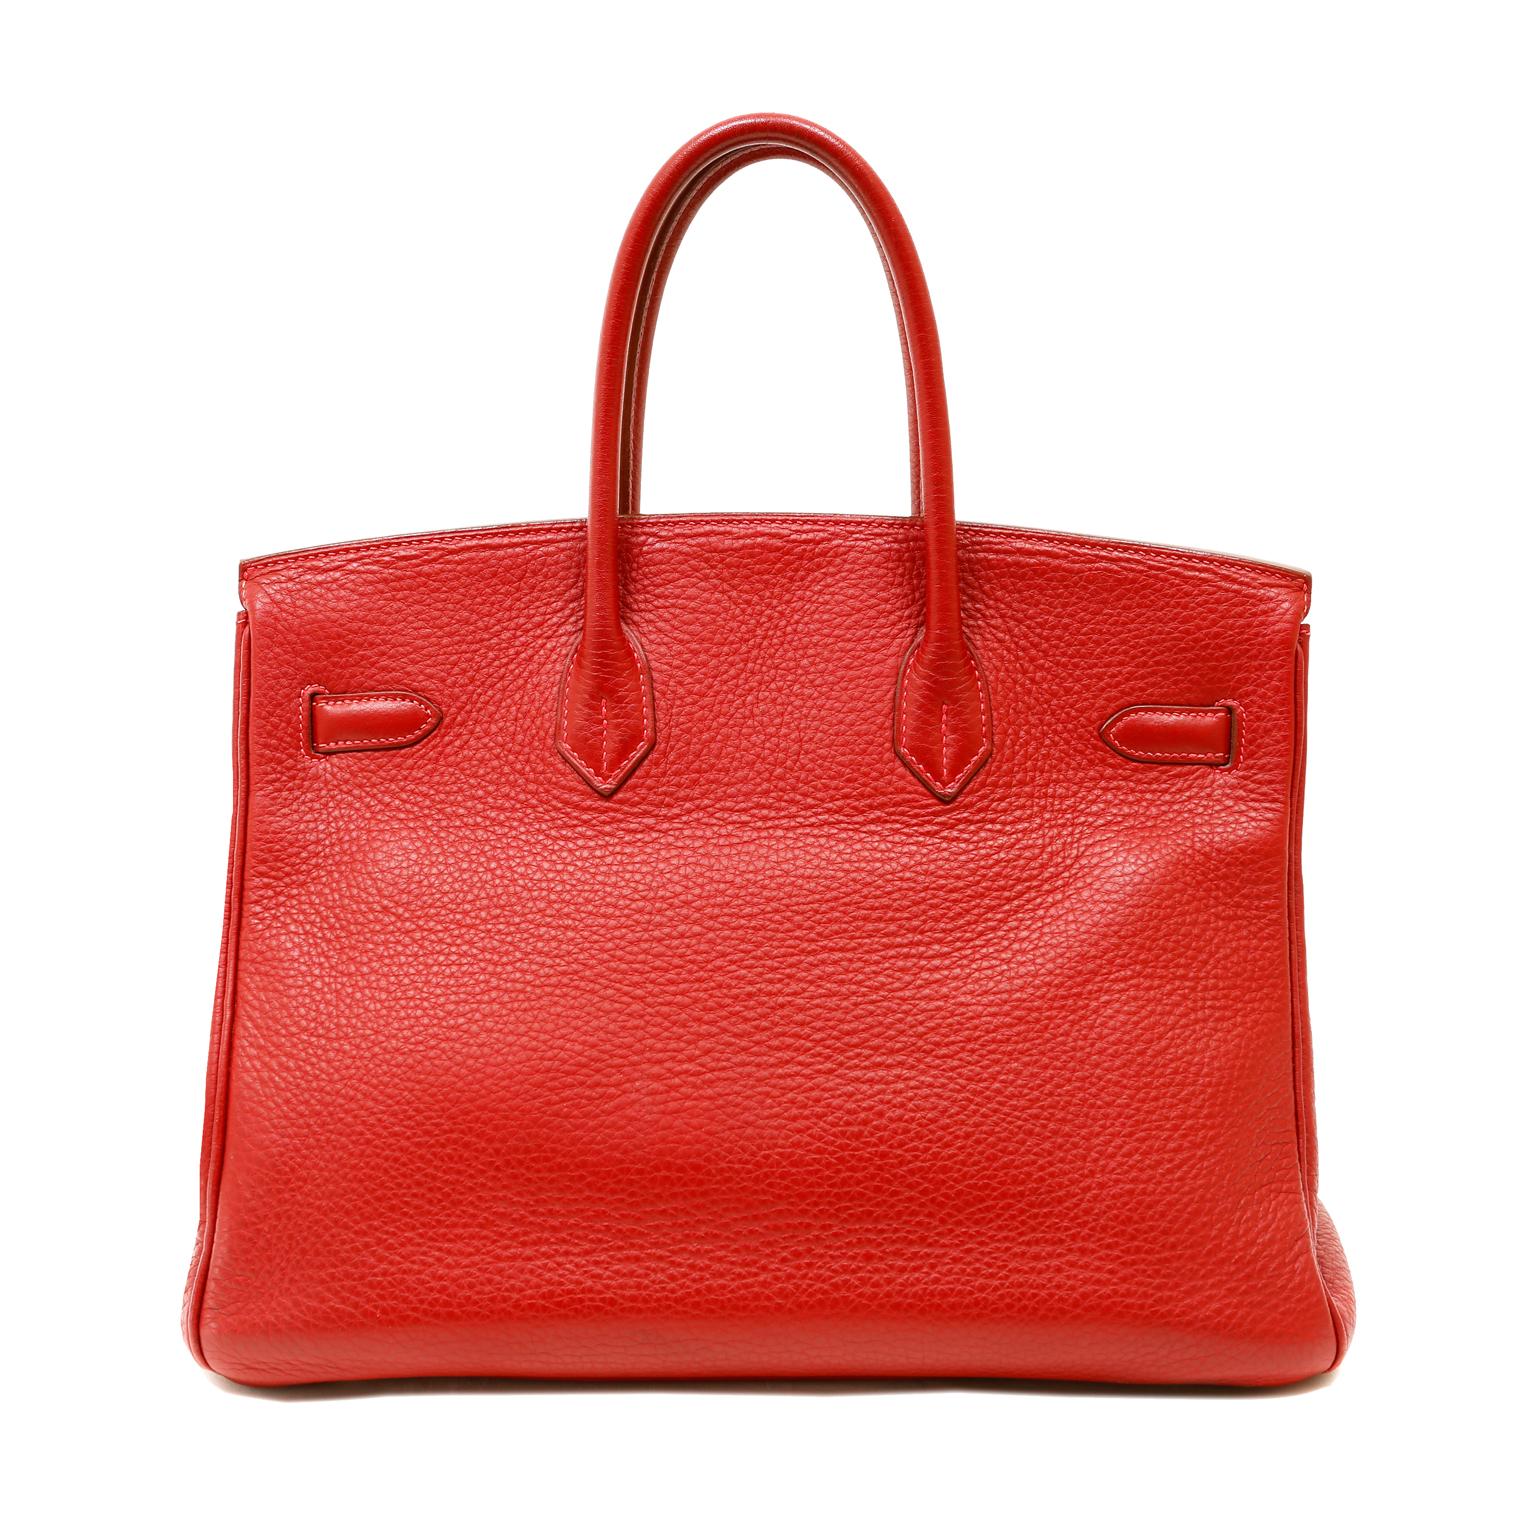 This authentic Hermès Rubis Red Togo 35 cm Birkin is in excellent condition.  A stunning lipstick red with pink undertones, Rubis is is perfectly paired with Palladium hardware.
Vivid red Togo leather is textured and soft to the hand with a